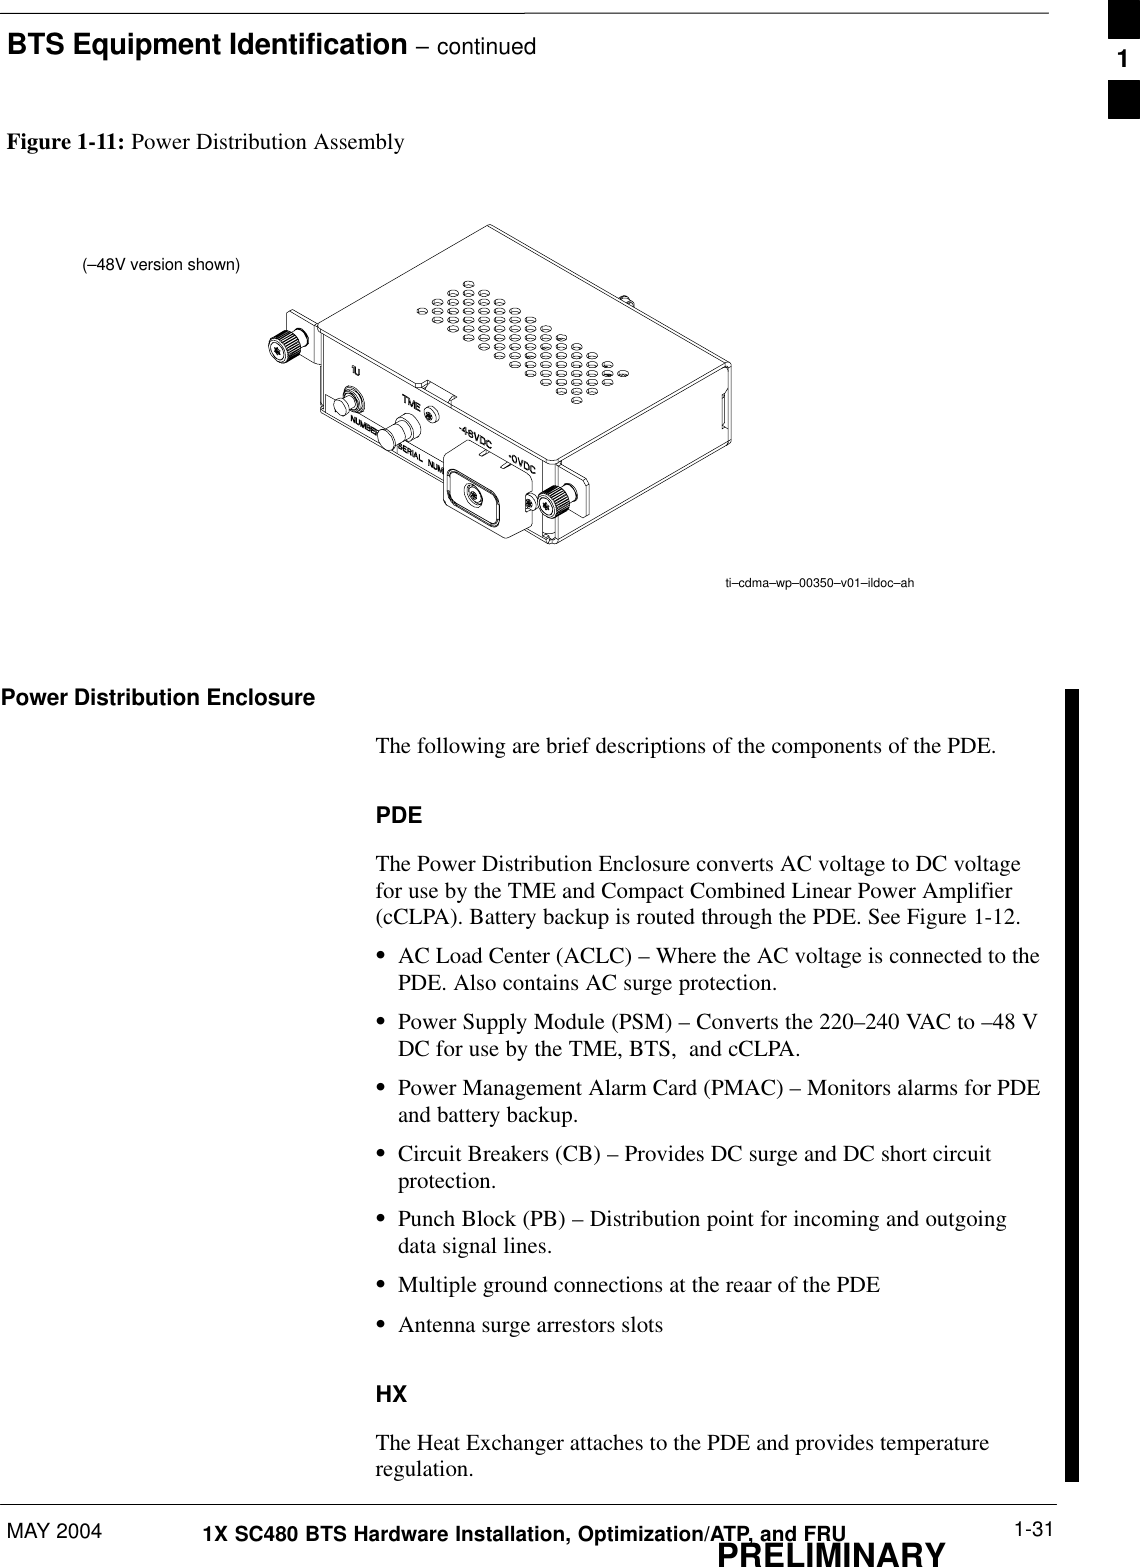 BTS Equipment Identification – continuedMAY 2004 1-311X SC480 BTS Hardware Installation, Optimization/ATP, and FRUPRELIMINARYFigure 1-11: Power Distribution Assemblyti–cdma–wp–00350–v01–ildoc–ah (–48V version shown)Power Distribution EnclosureThe following are brief descriptions of the components of the PDE.PDEThe Power Distribution Enclosure converts AC voltage to DC voltagefor use by the TME and Compact Combined Linear Power Amplifier(cCLPA). Battery backup is routed through the PDE. See Figure 1-12.SAC Load Center (ACLC) – Where the AC voltage is connected to thePDE. Also contains AC surge protection.SPower Supply Module (PSM) – Converts the 220–240 VAC to –48 VDC for use by the TME, BTS,  and cCLPA.SPower Management Alarm Card (PMAC) – Monitors alarms for PDEand battery backup.SCircuit Breakers (CB) – Provides DC surge and DC short circuitprotection.SPunch Block (PB) – Distribution point for incoming and outgoingdata signal lines.SMultiple ground connections at the reaar of the PDESAntenna surge arrestors slotsHXThe Heat Exchanger attaches to the PDE and provides temperatureregulation.1